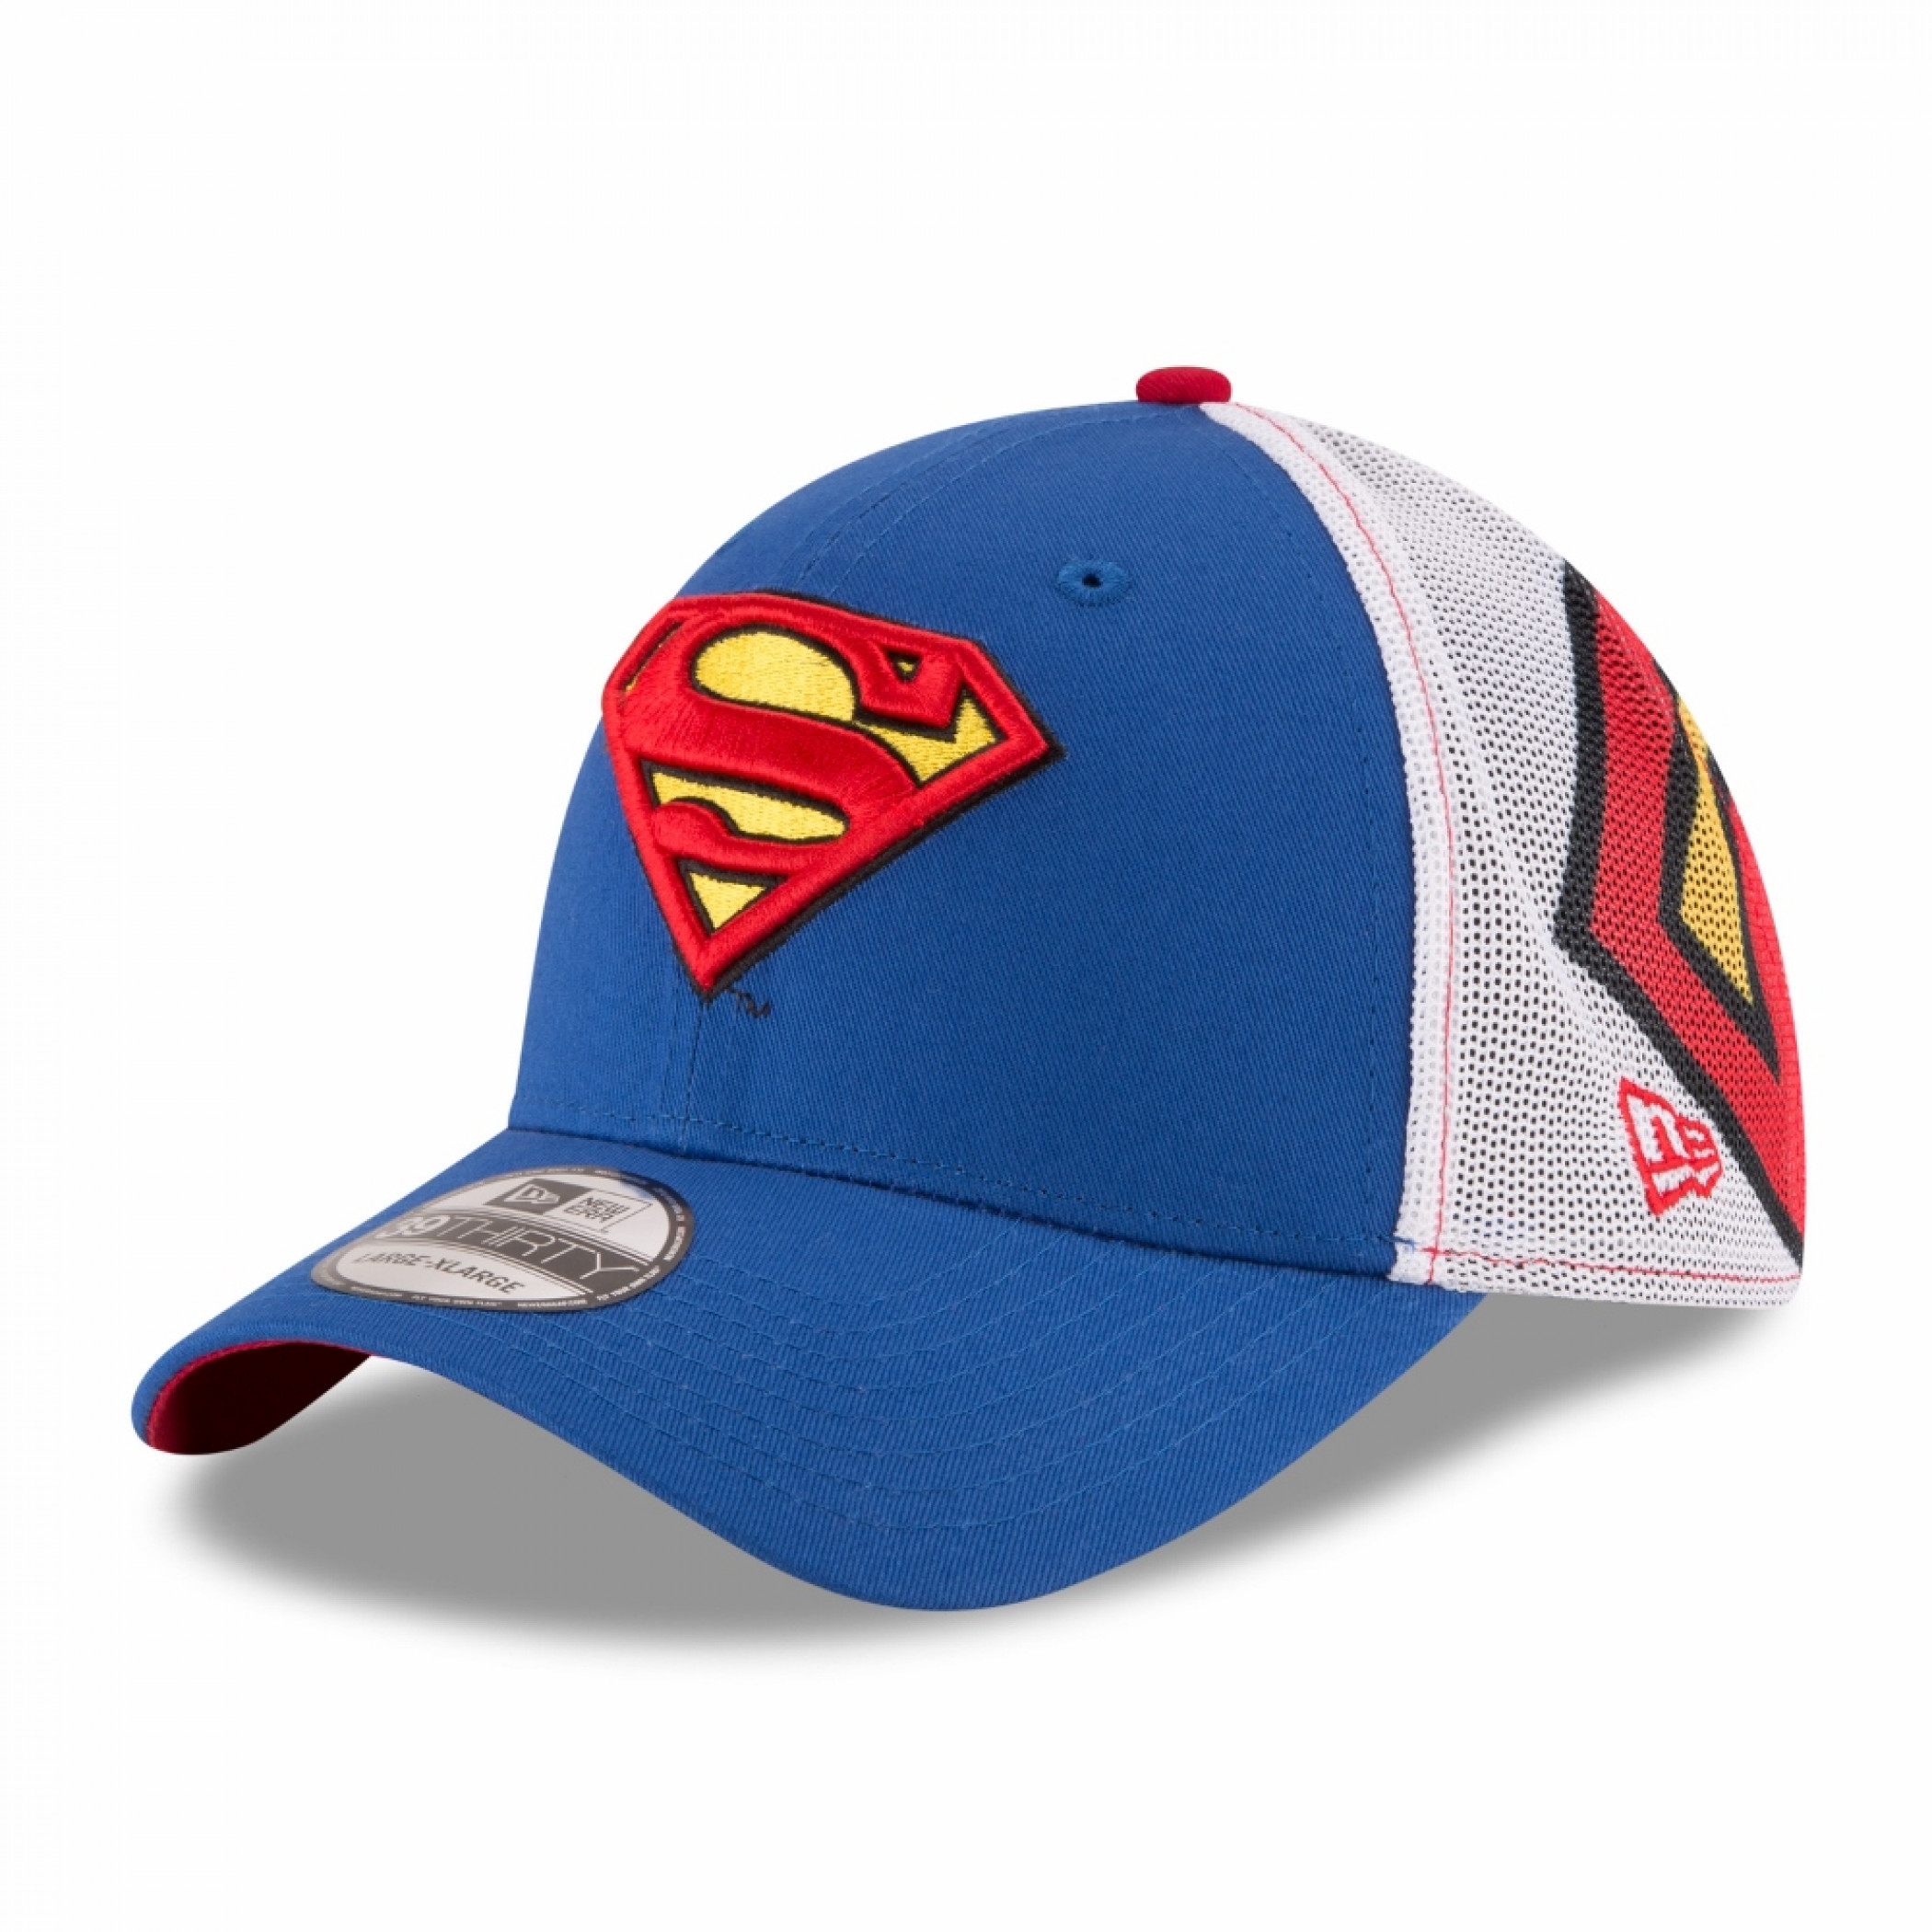 Superman Classic Symbol on Navy New Era 59Fifty Fitted Hat-7 3/8